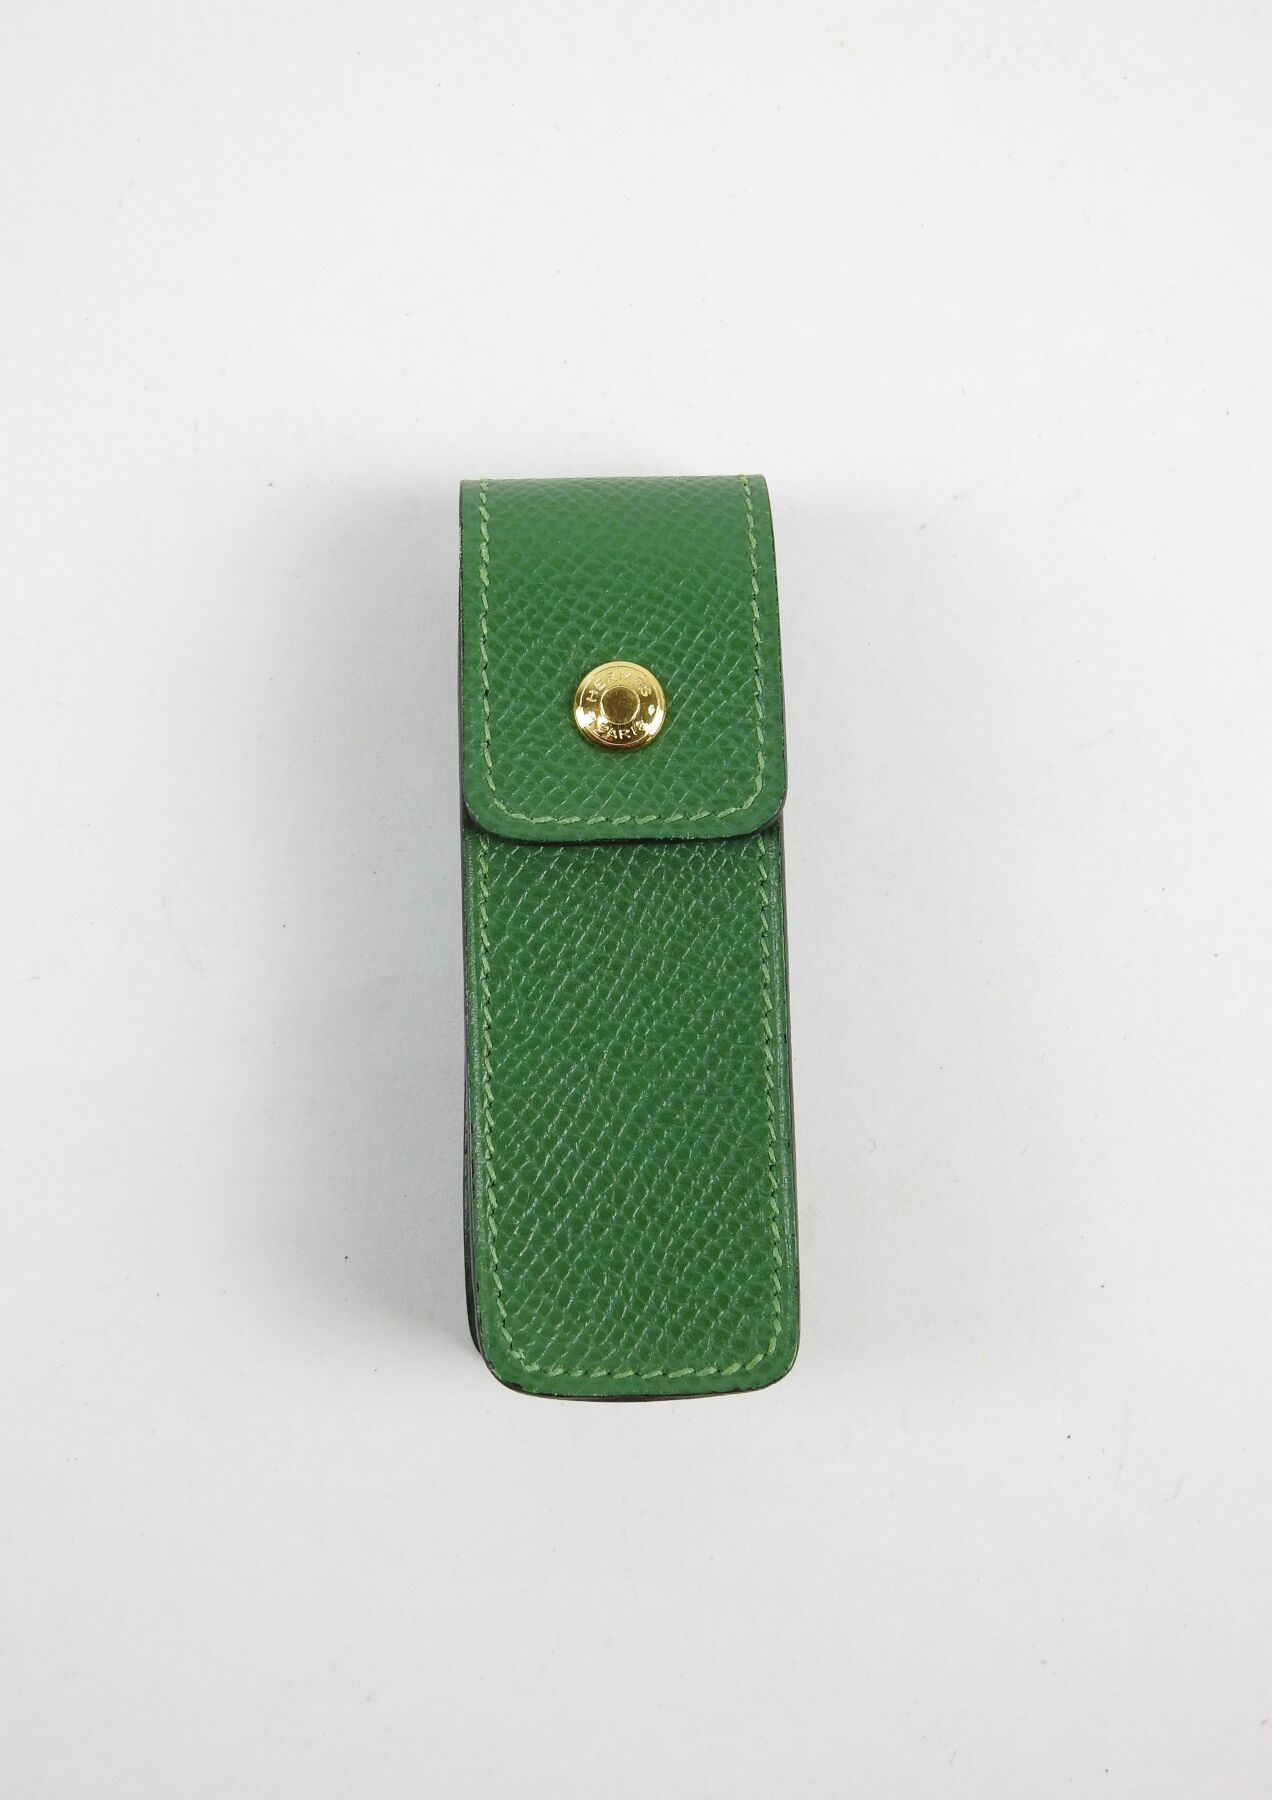 Null HERMES - Paris. Green leather chewing gum or lipstick case. 8.5 x 3 x 3 cm.&hellip;